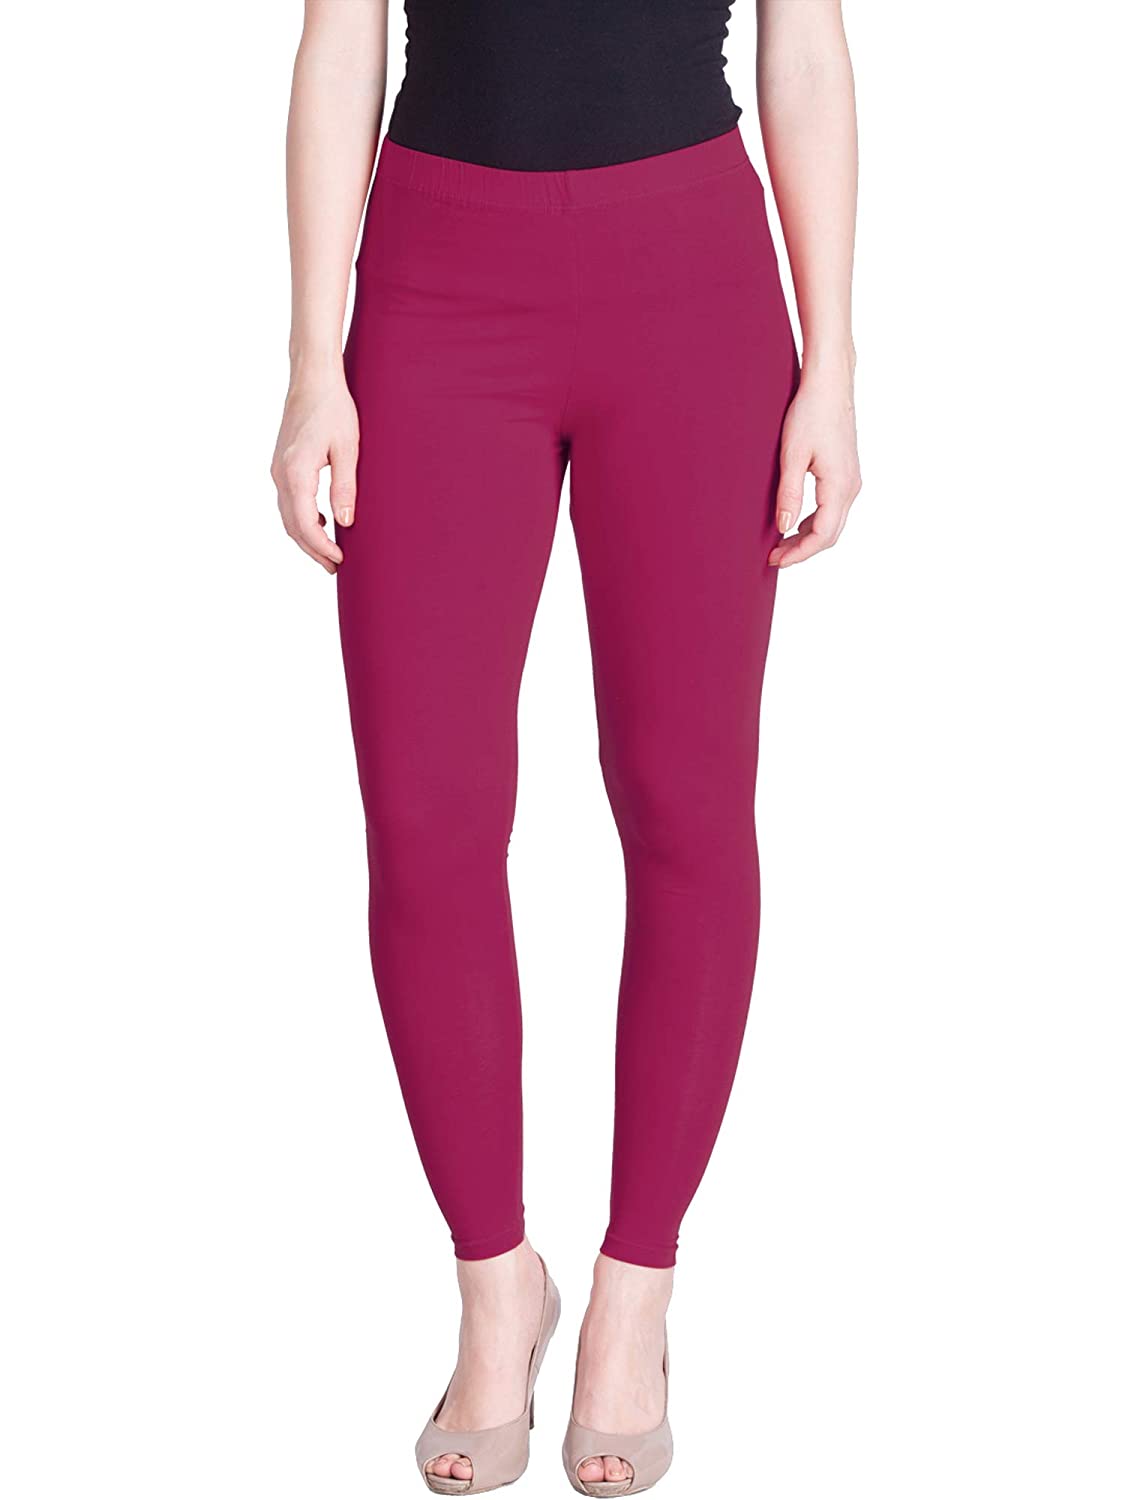 Lux Lyra Ankle Length Pink Leggings free Size for Woman - Stilento